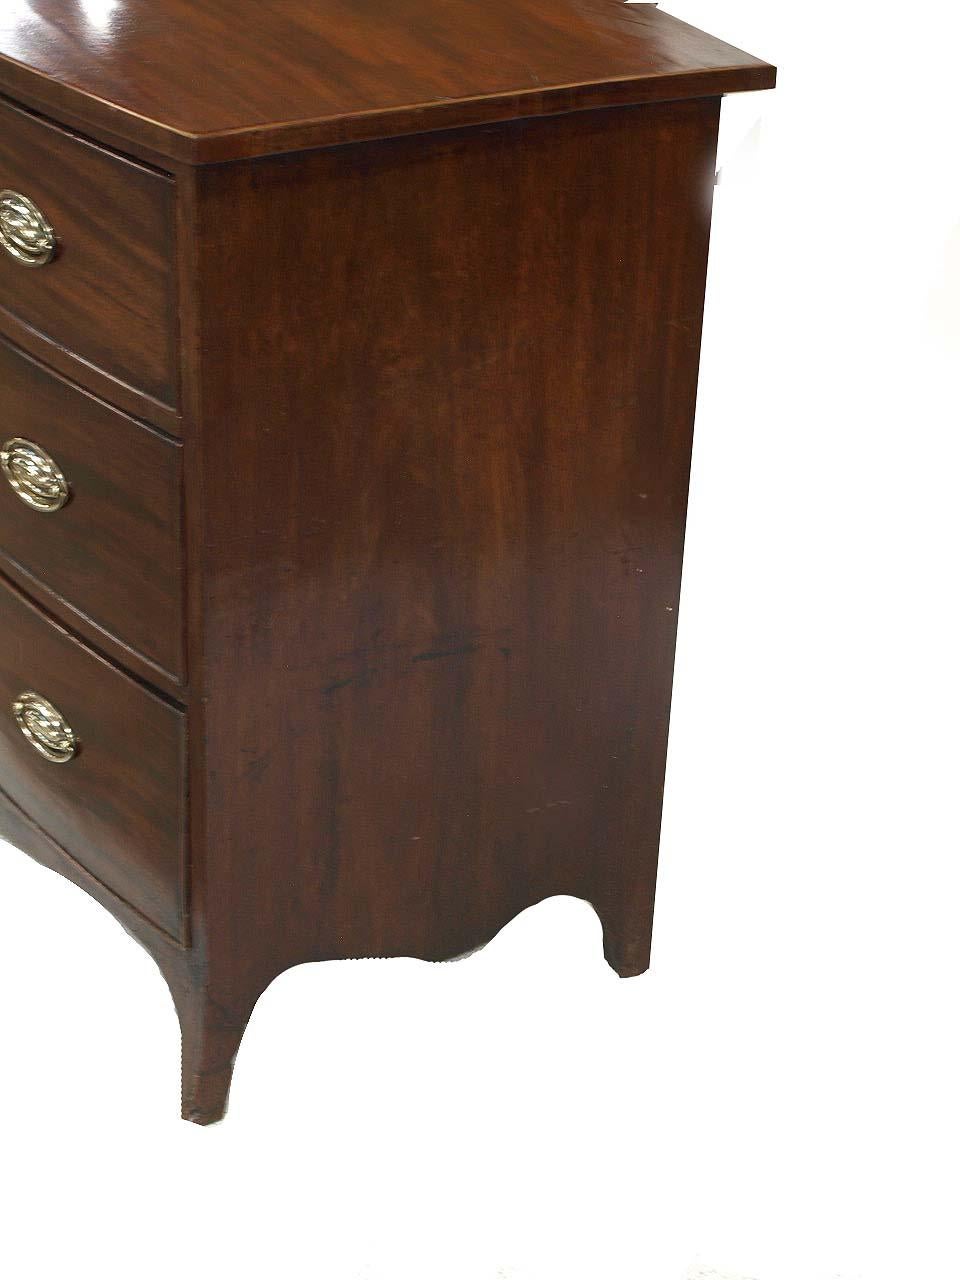 Hepplewhite bow front chest, the top of this mahogany chest has beautiful figured grain and the edge is banded with boxwood string inlay. The three graduated drawers have antique oval brass pulls, however, they are not original ; the chest has a